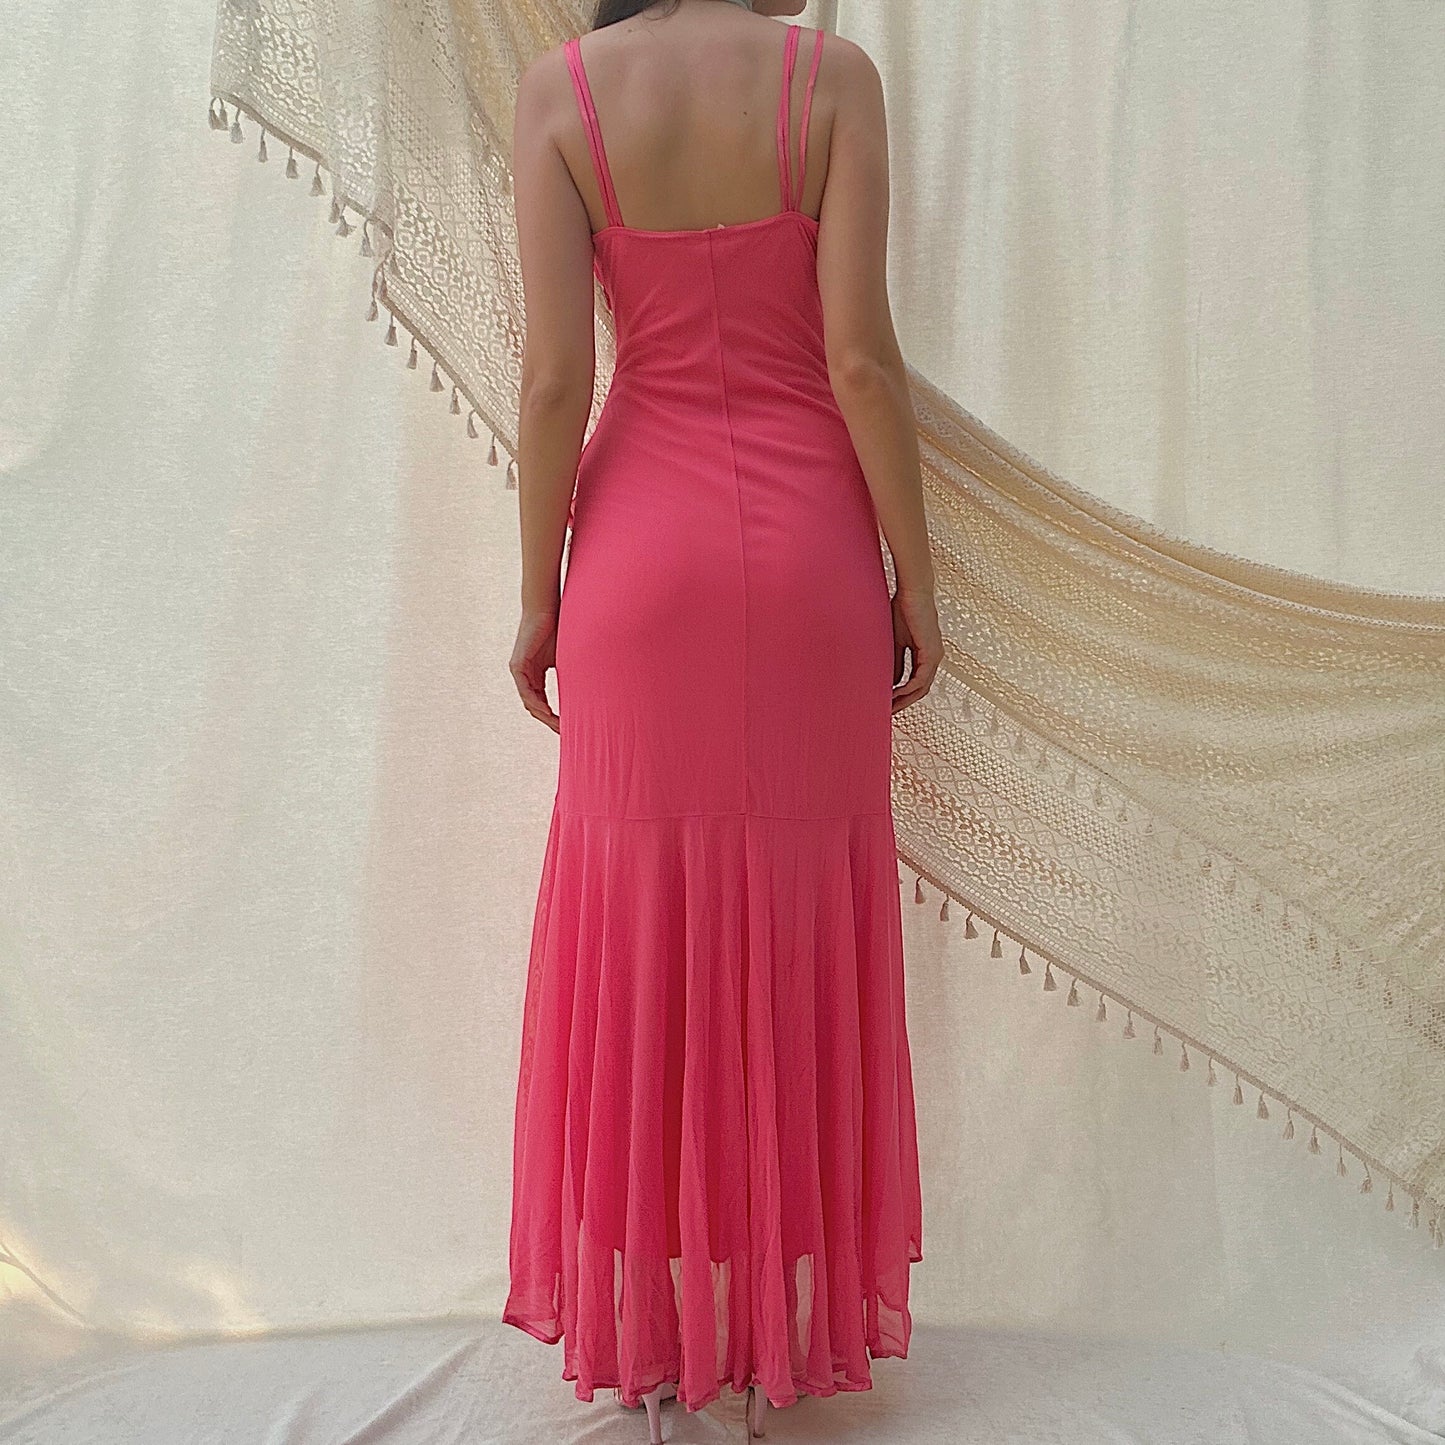 Y2K Hot Pink Ruffle Gown / SZ M